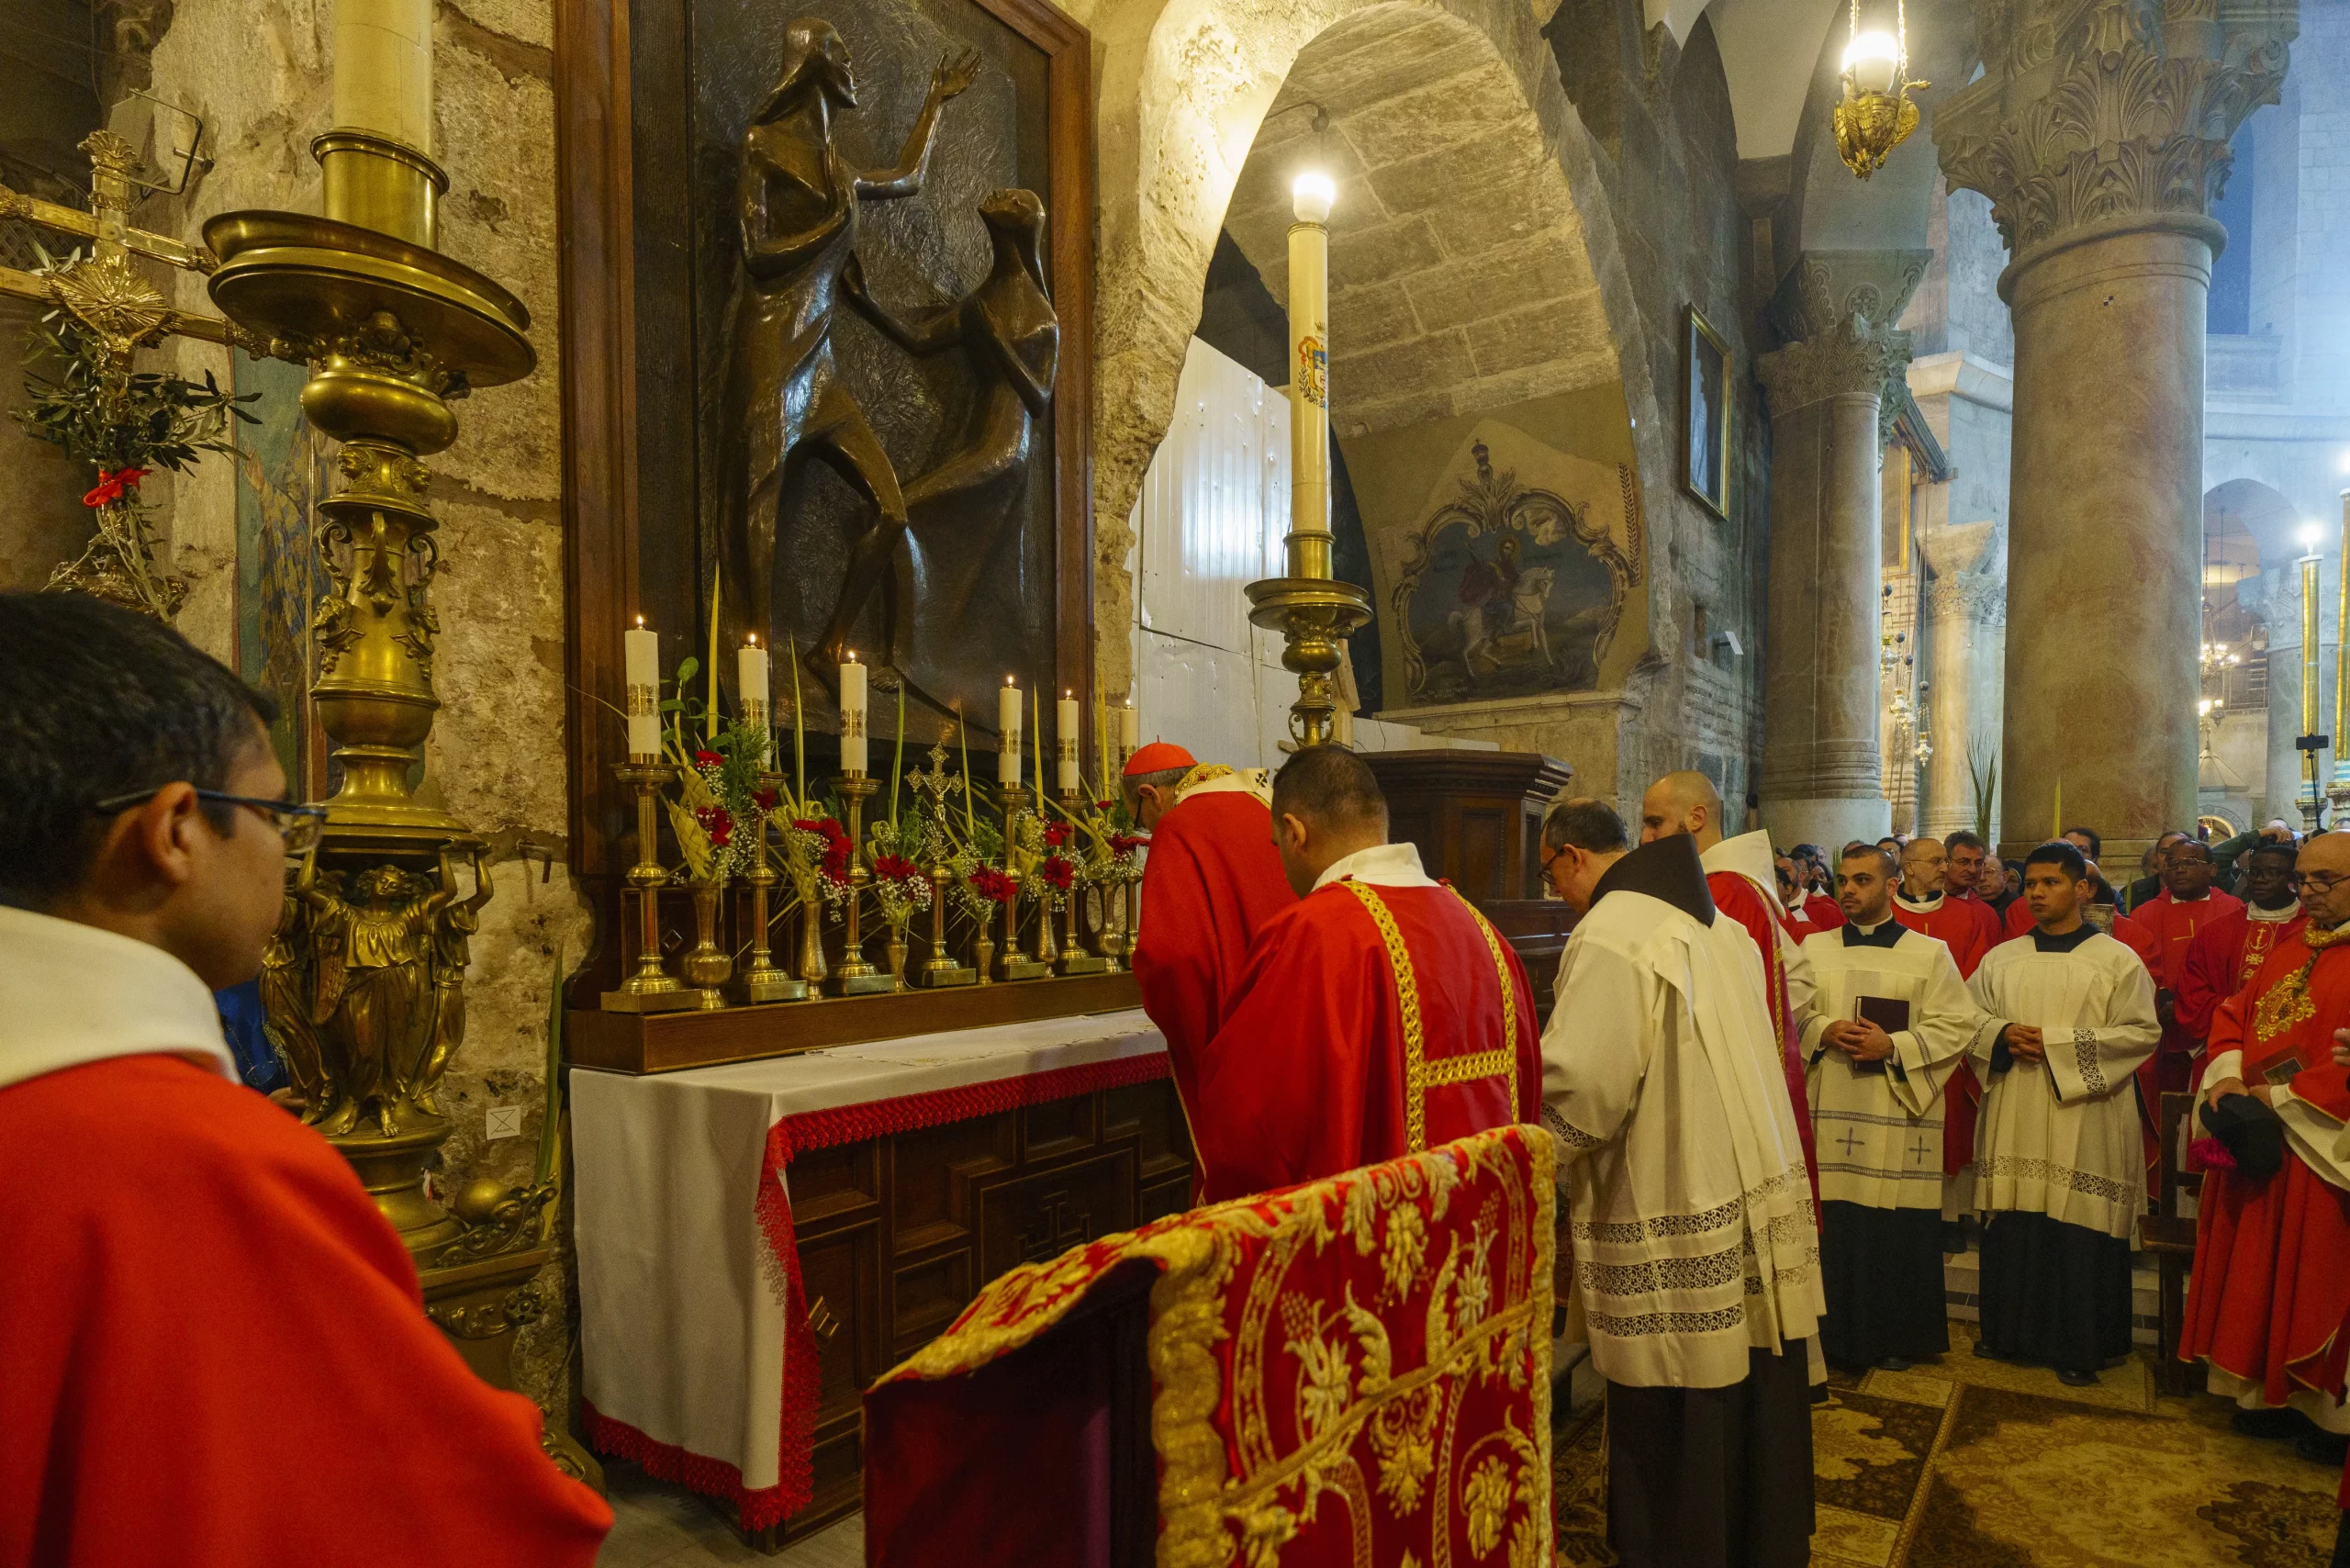 On Sunday morning, March 24, 2024, the solemn Palm Sunday liturgy was held at the Holy Sepulcher, presided over by Cardinal Pierbattista Pizzaballa. The Eucharistic celebration took place at the altar of Mary Magdalene. Credit: Marinella Bandini